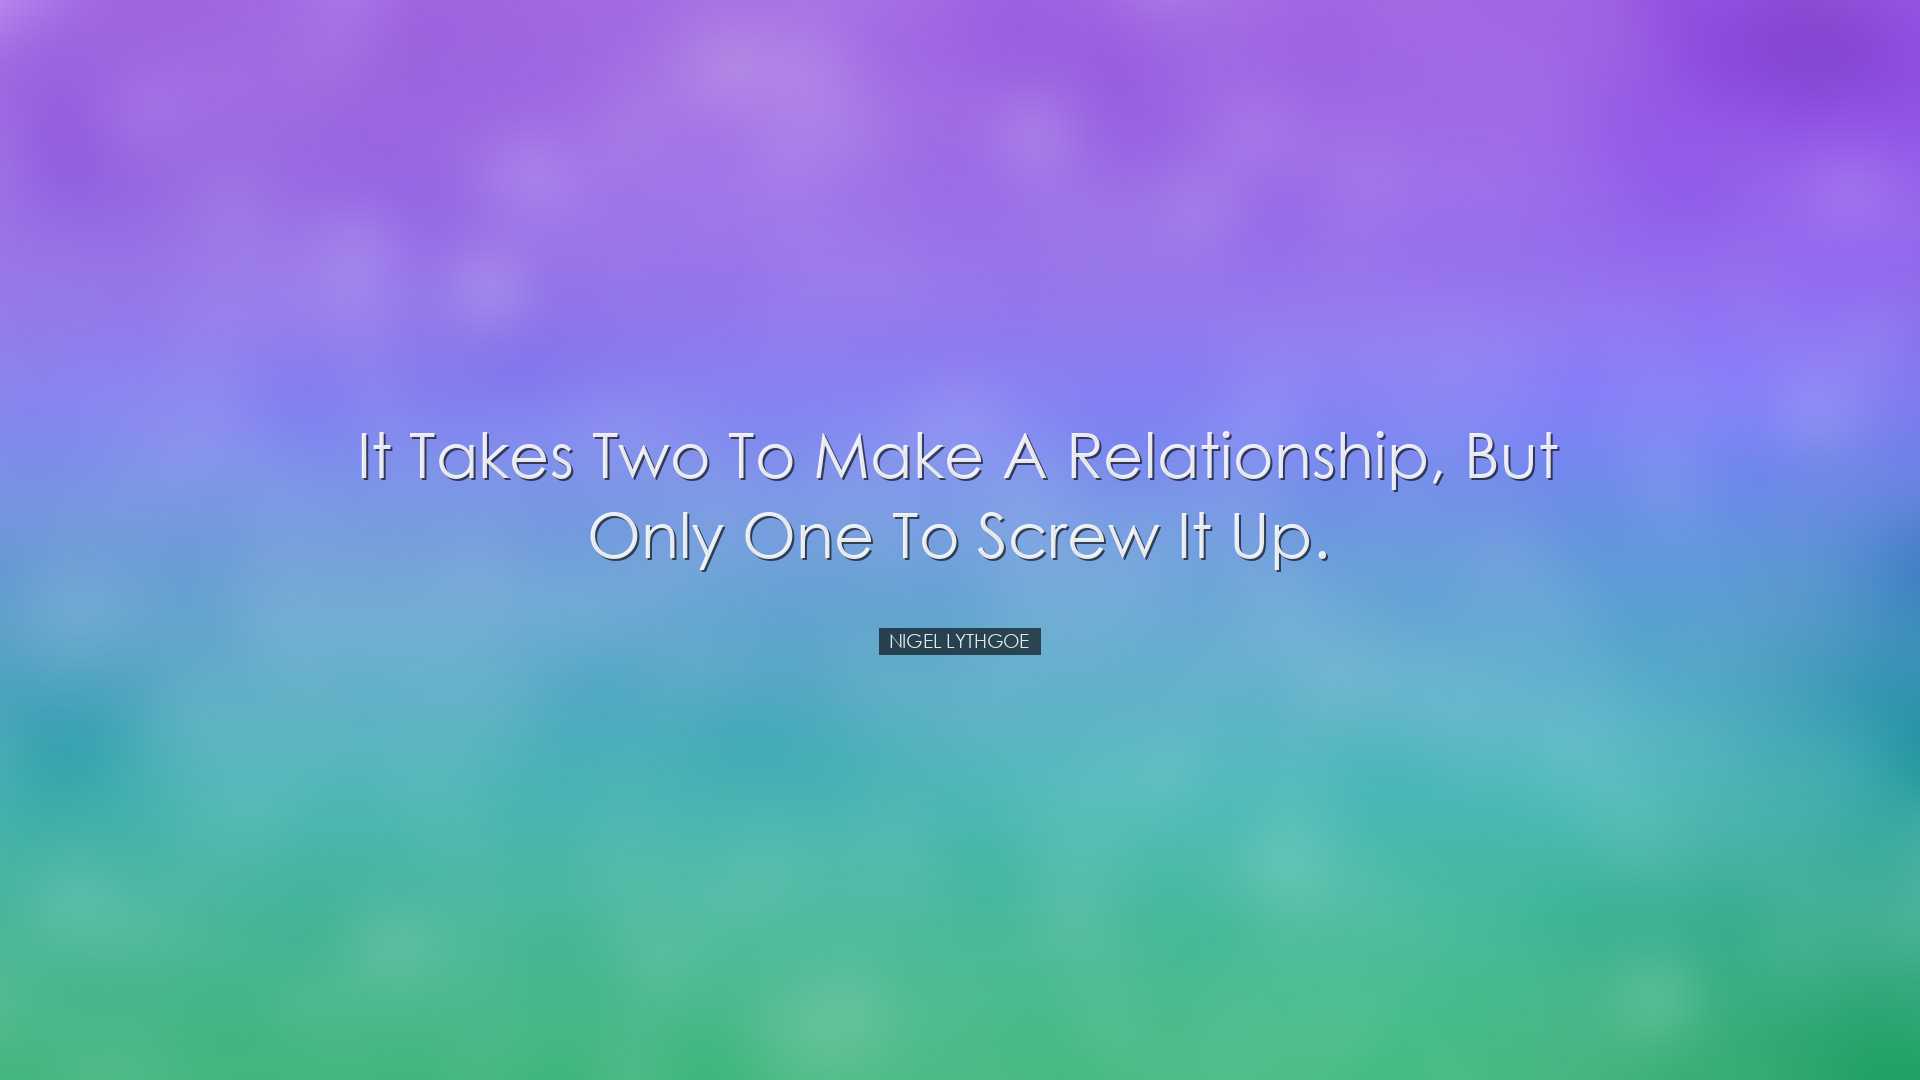 It takes two to make a relationship, but only one to screw it up.